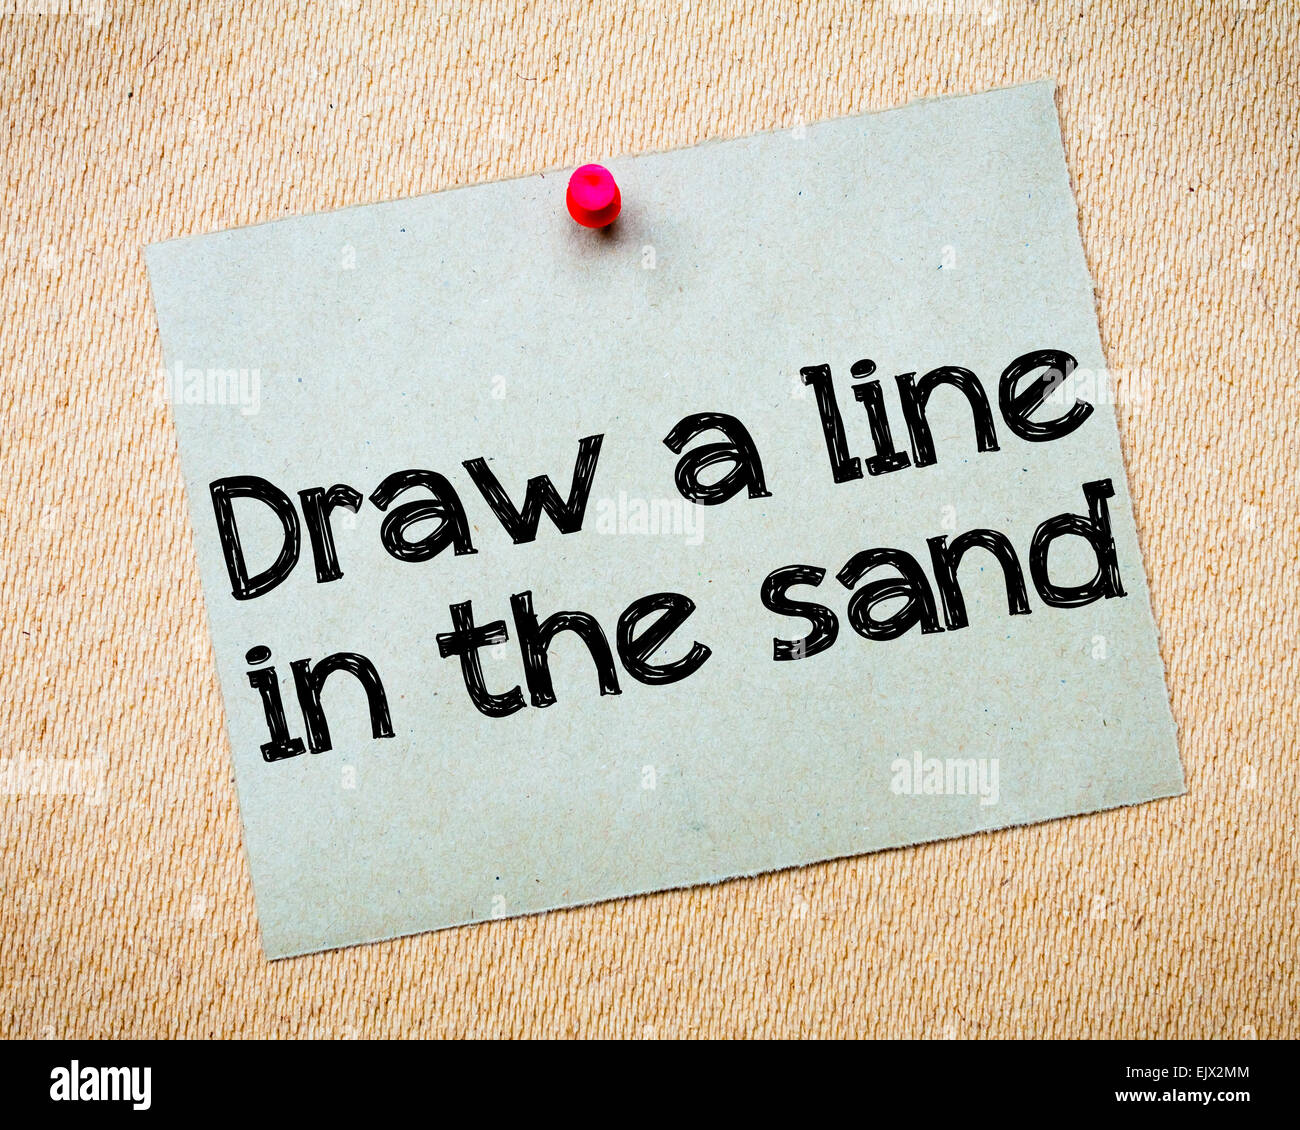 Draw a line in the sand Message. Recycled paper note pinned on cork board. Concept Image Stock Photo